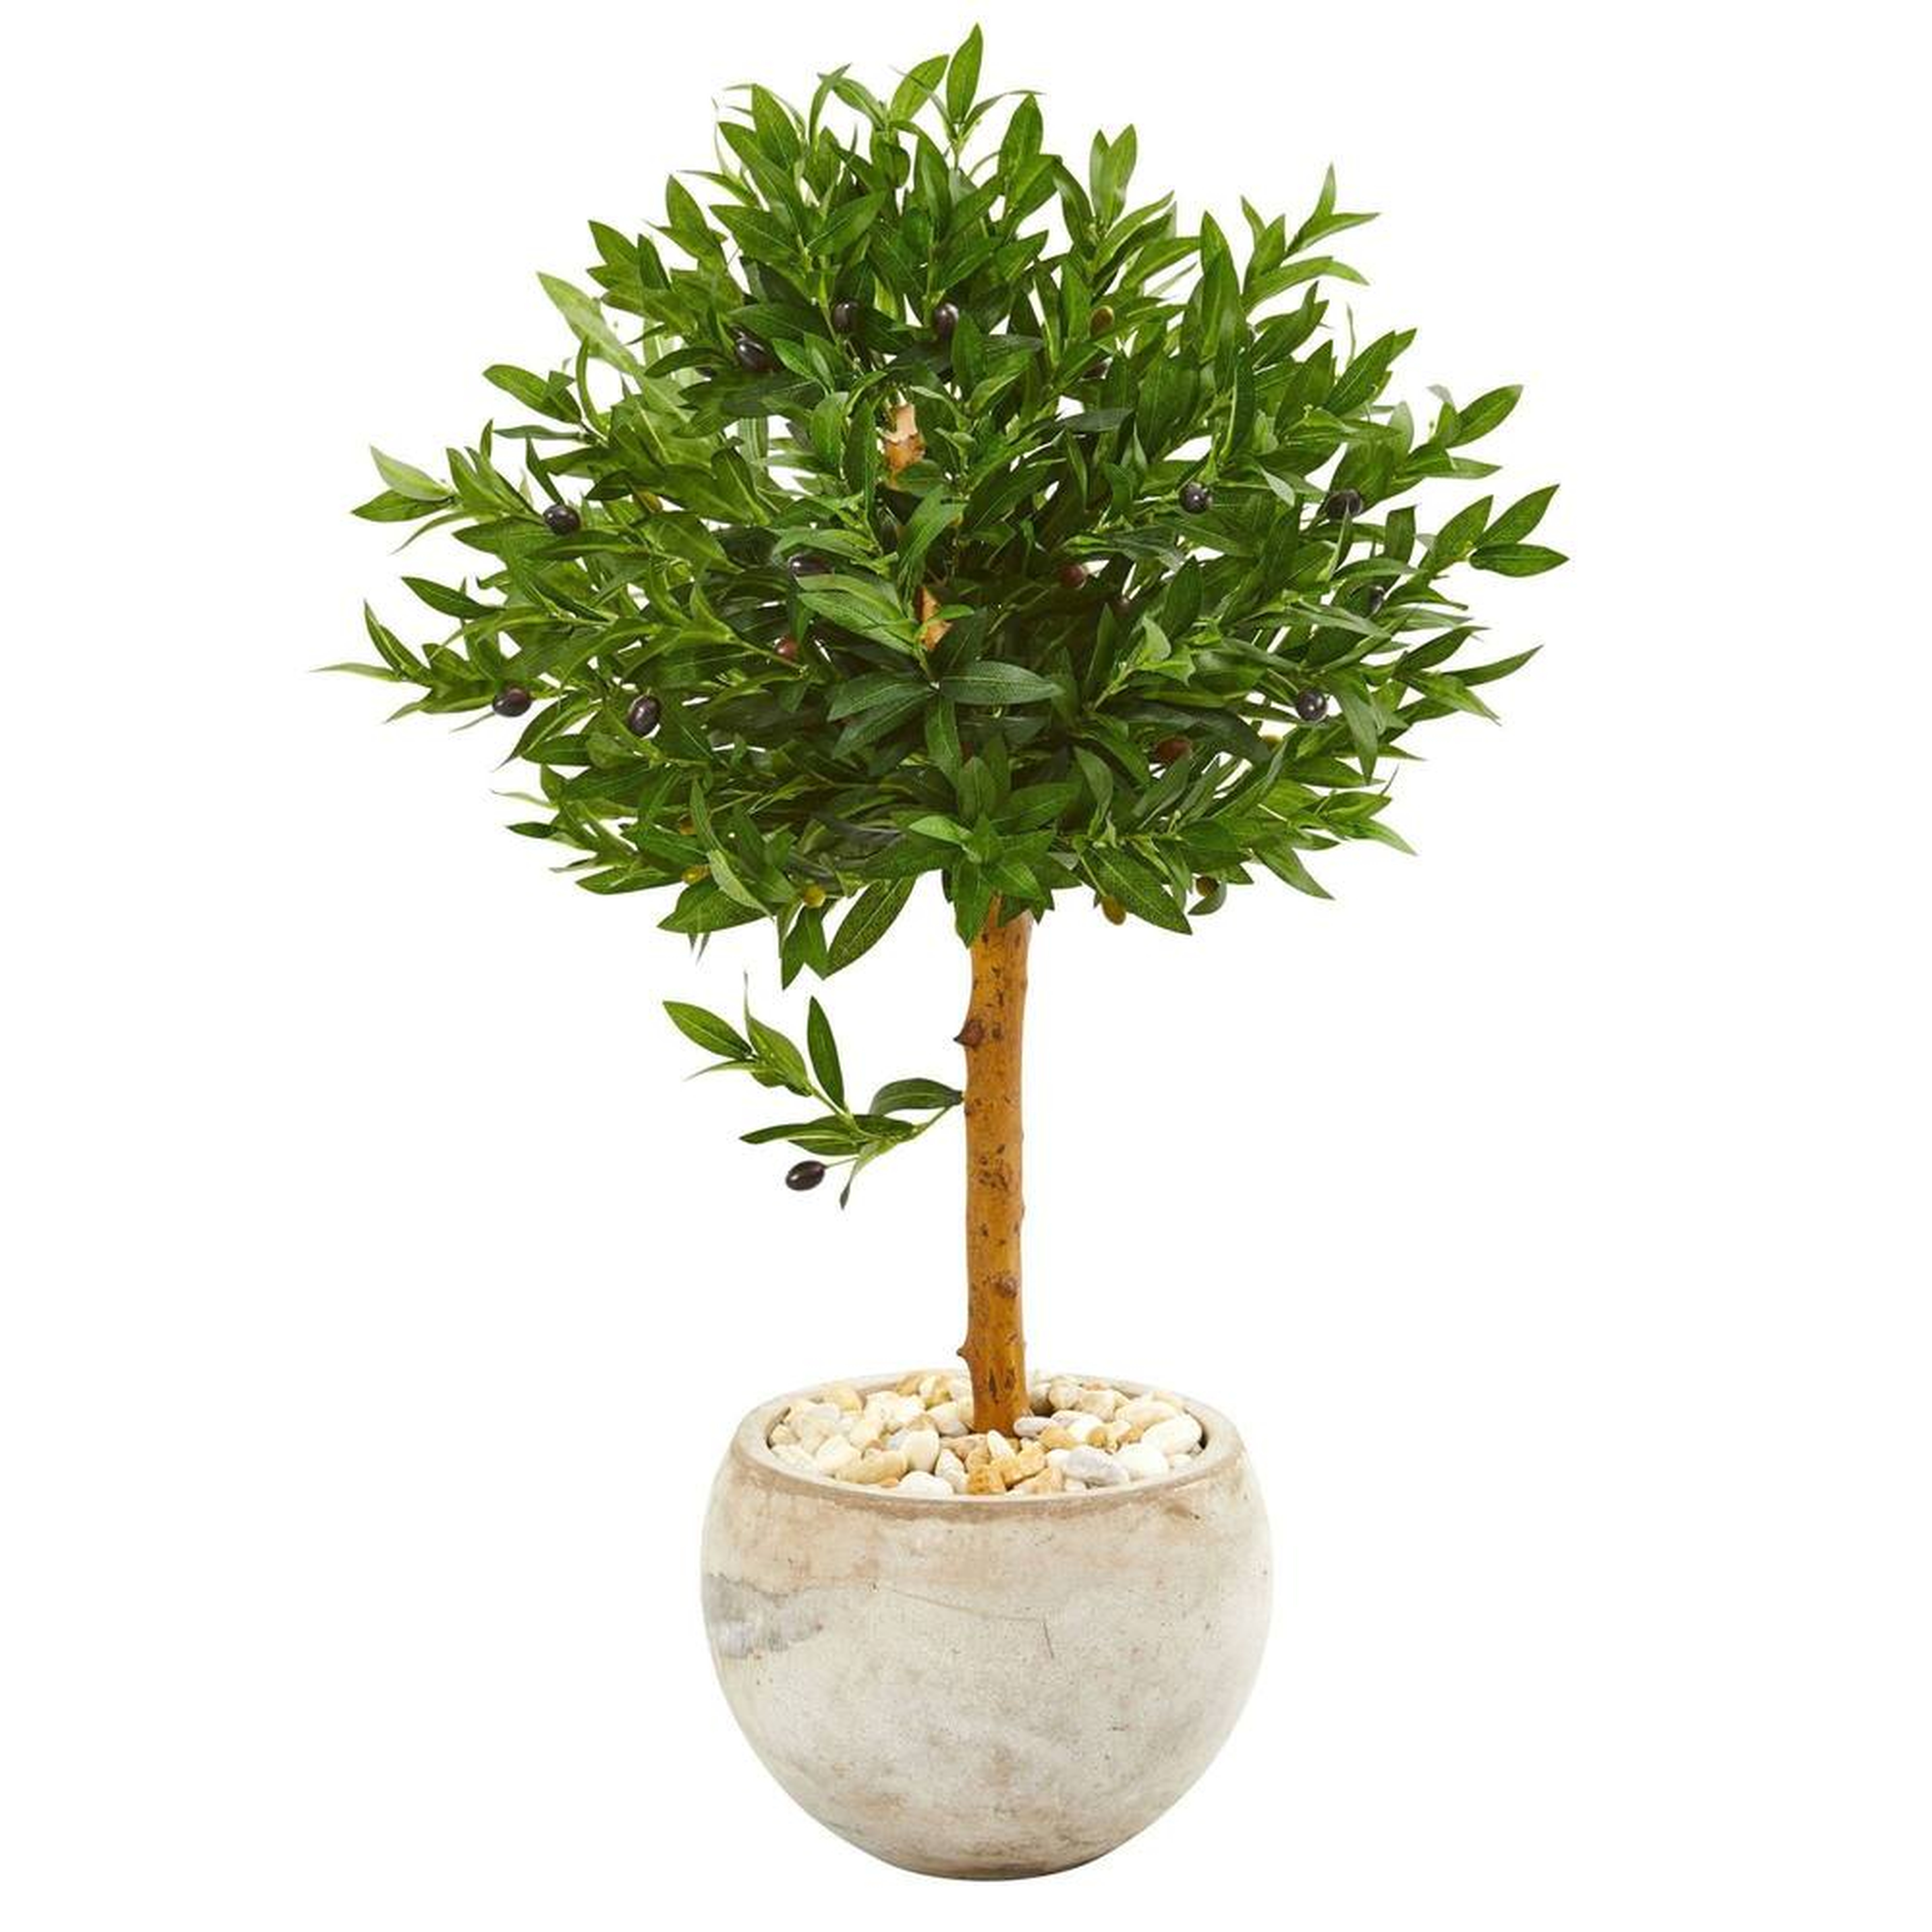 38" Olive Topiary Artificial Tree in Bowl Planter | UV Resistant (Outdoor) - Fiddle + Bloom